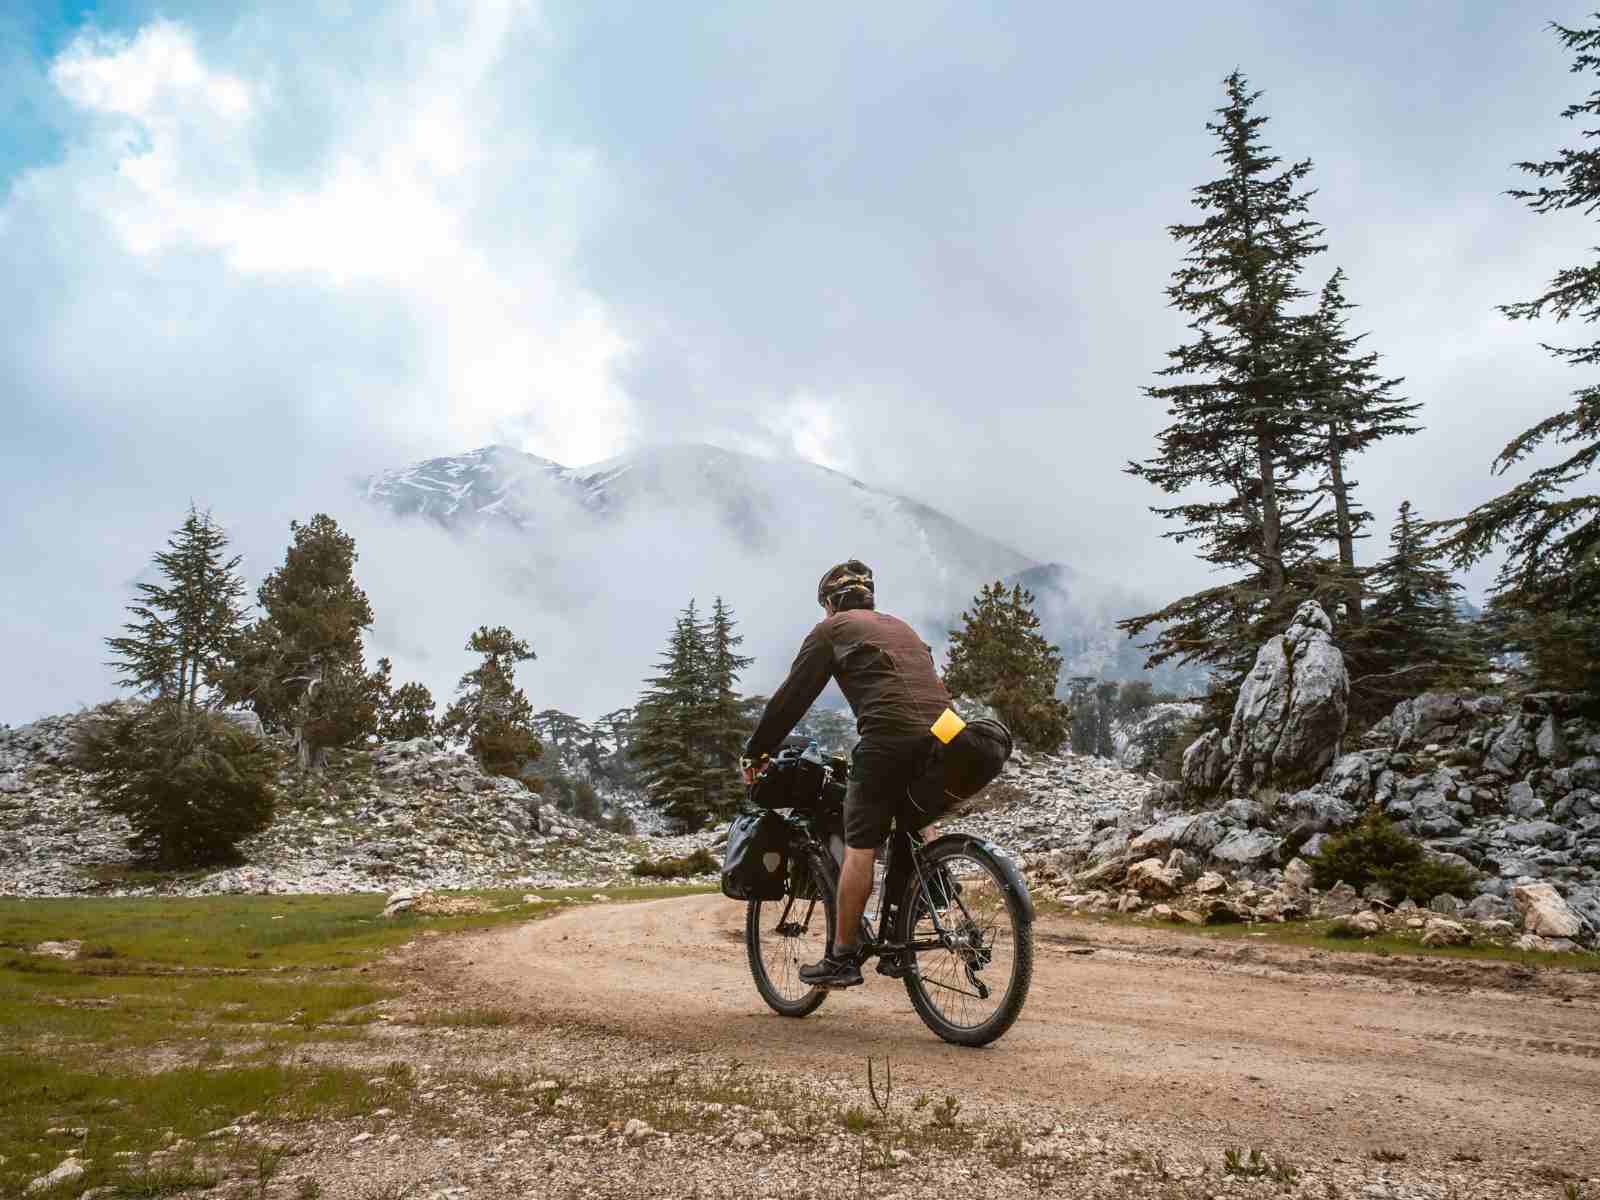 bikepacking affords access to rugged off road terrain